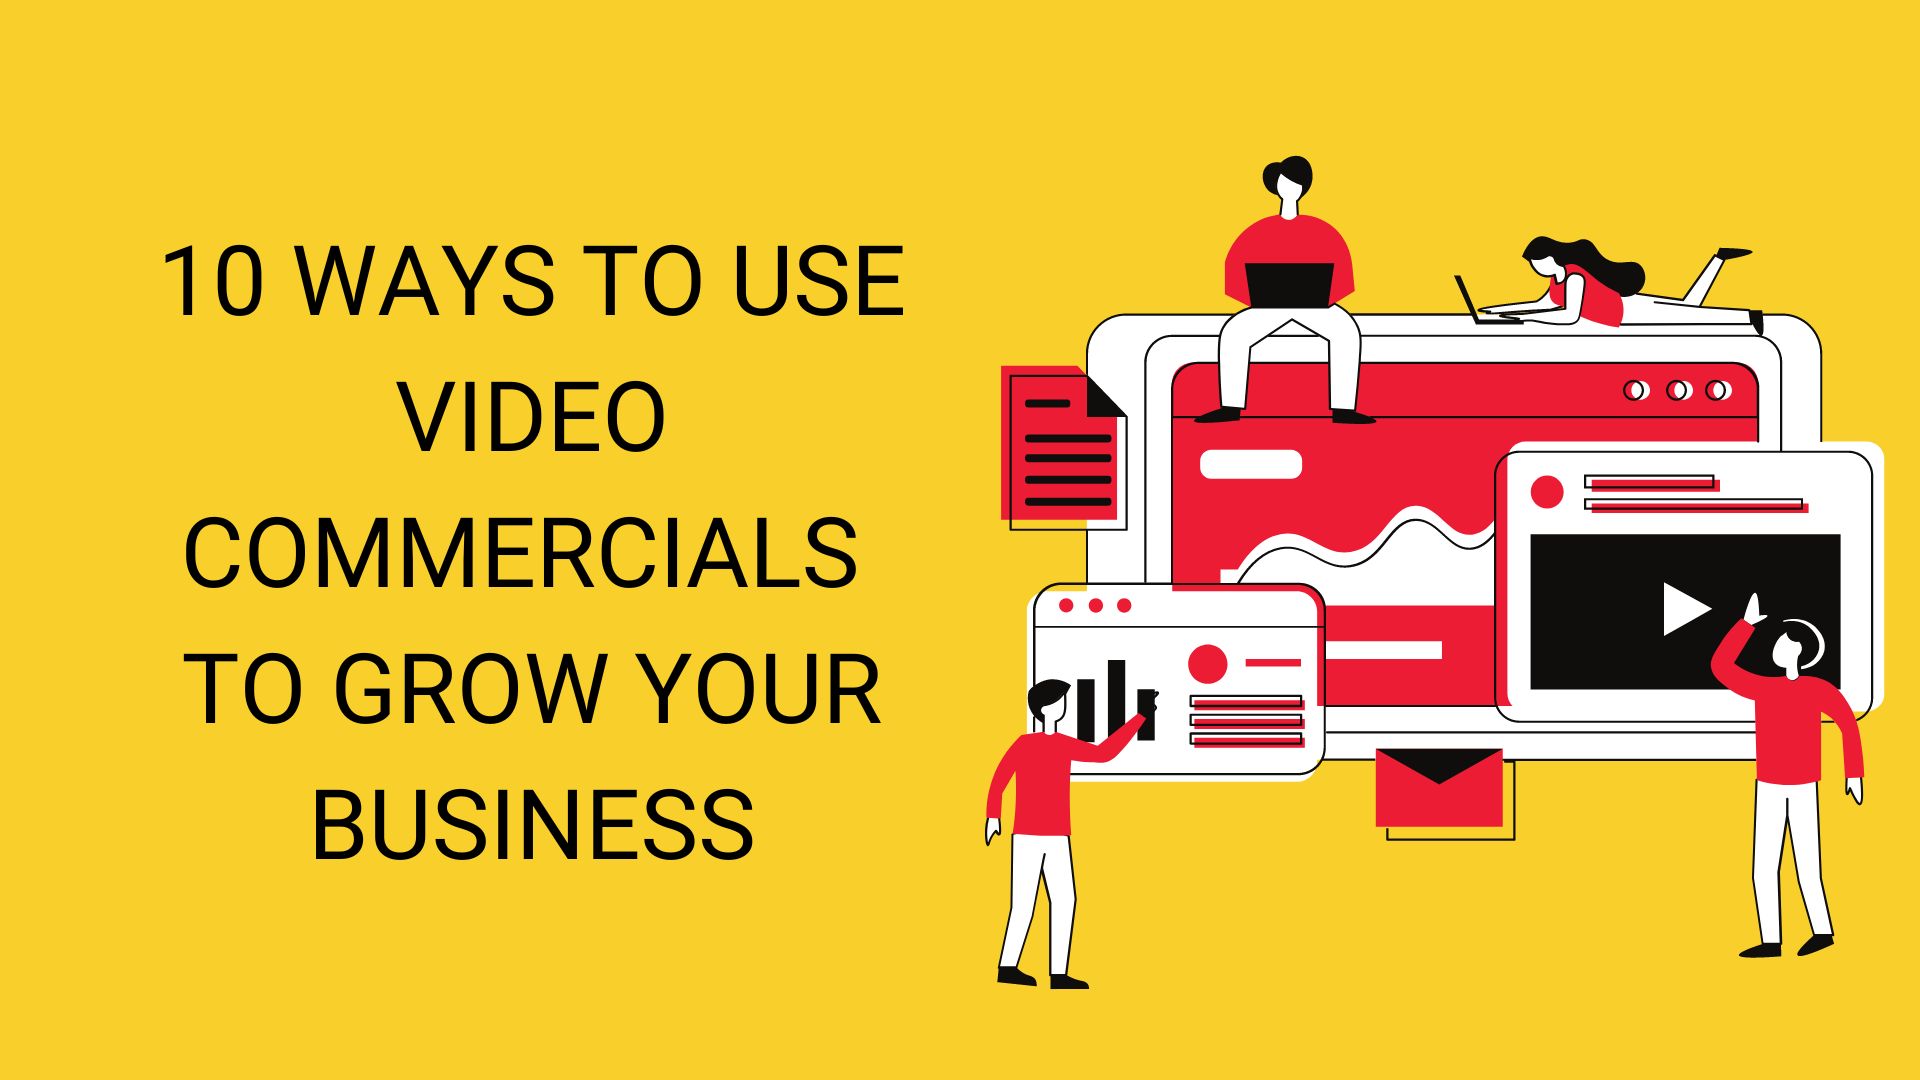 Know how you can use video commercials for maximum benefit!